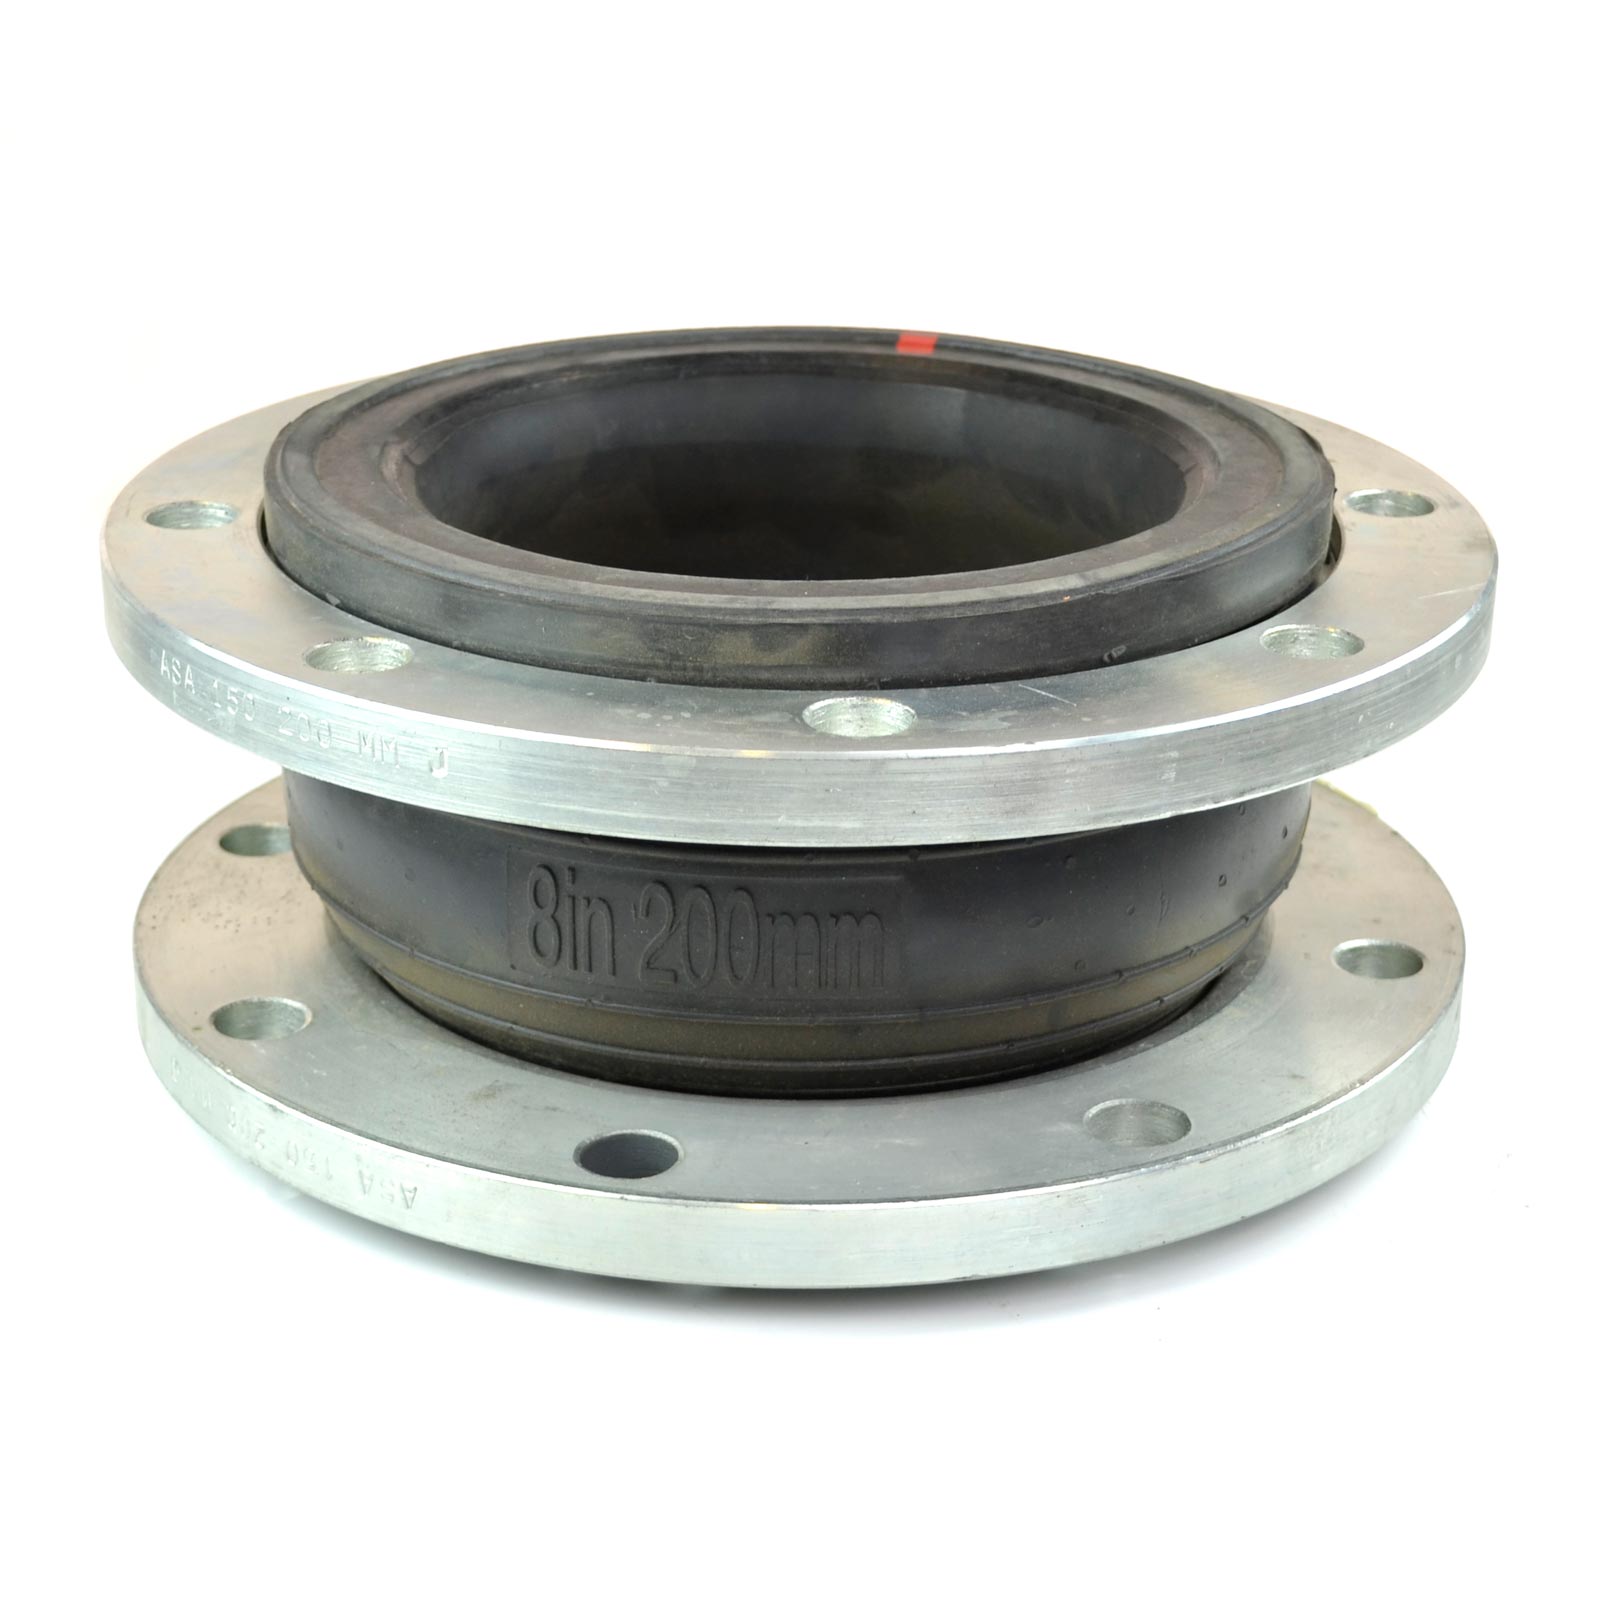 Verheugen combinatie Exclusief 8" Single Arch EPDM Expansion Joint | pdblowers, Inc.